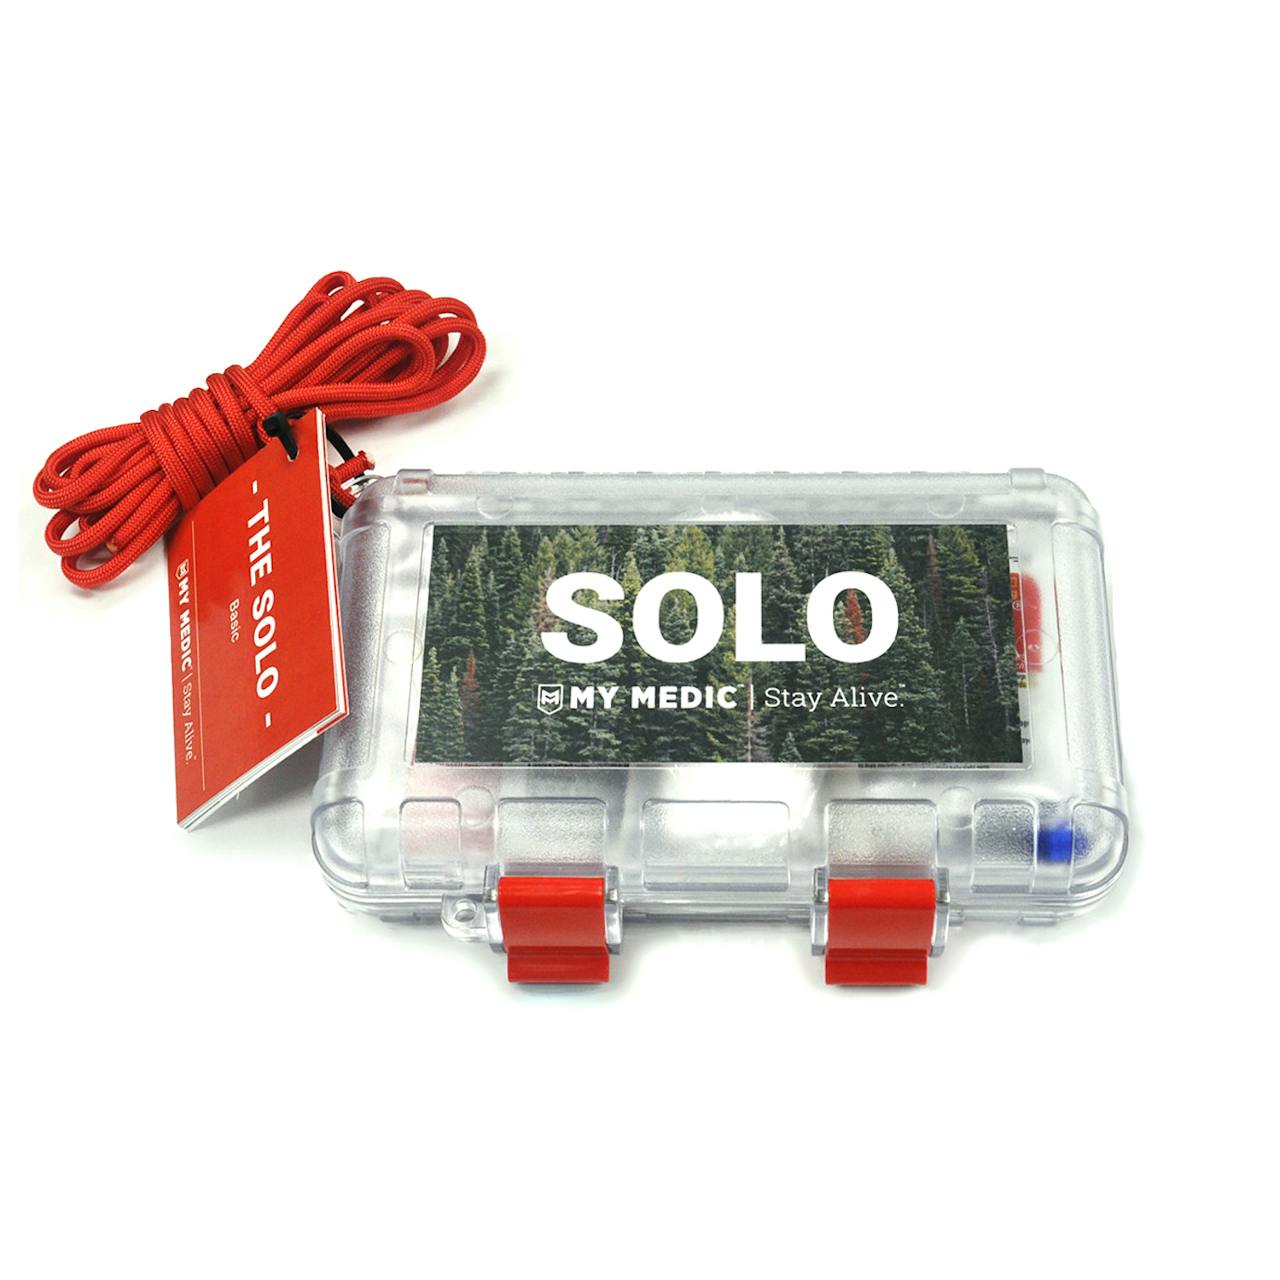 MyMedic The Solo - First Aid Essentials